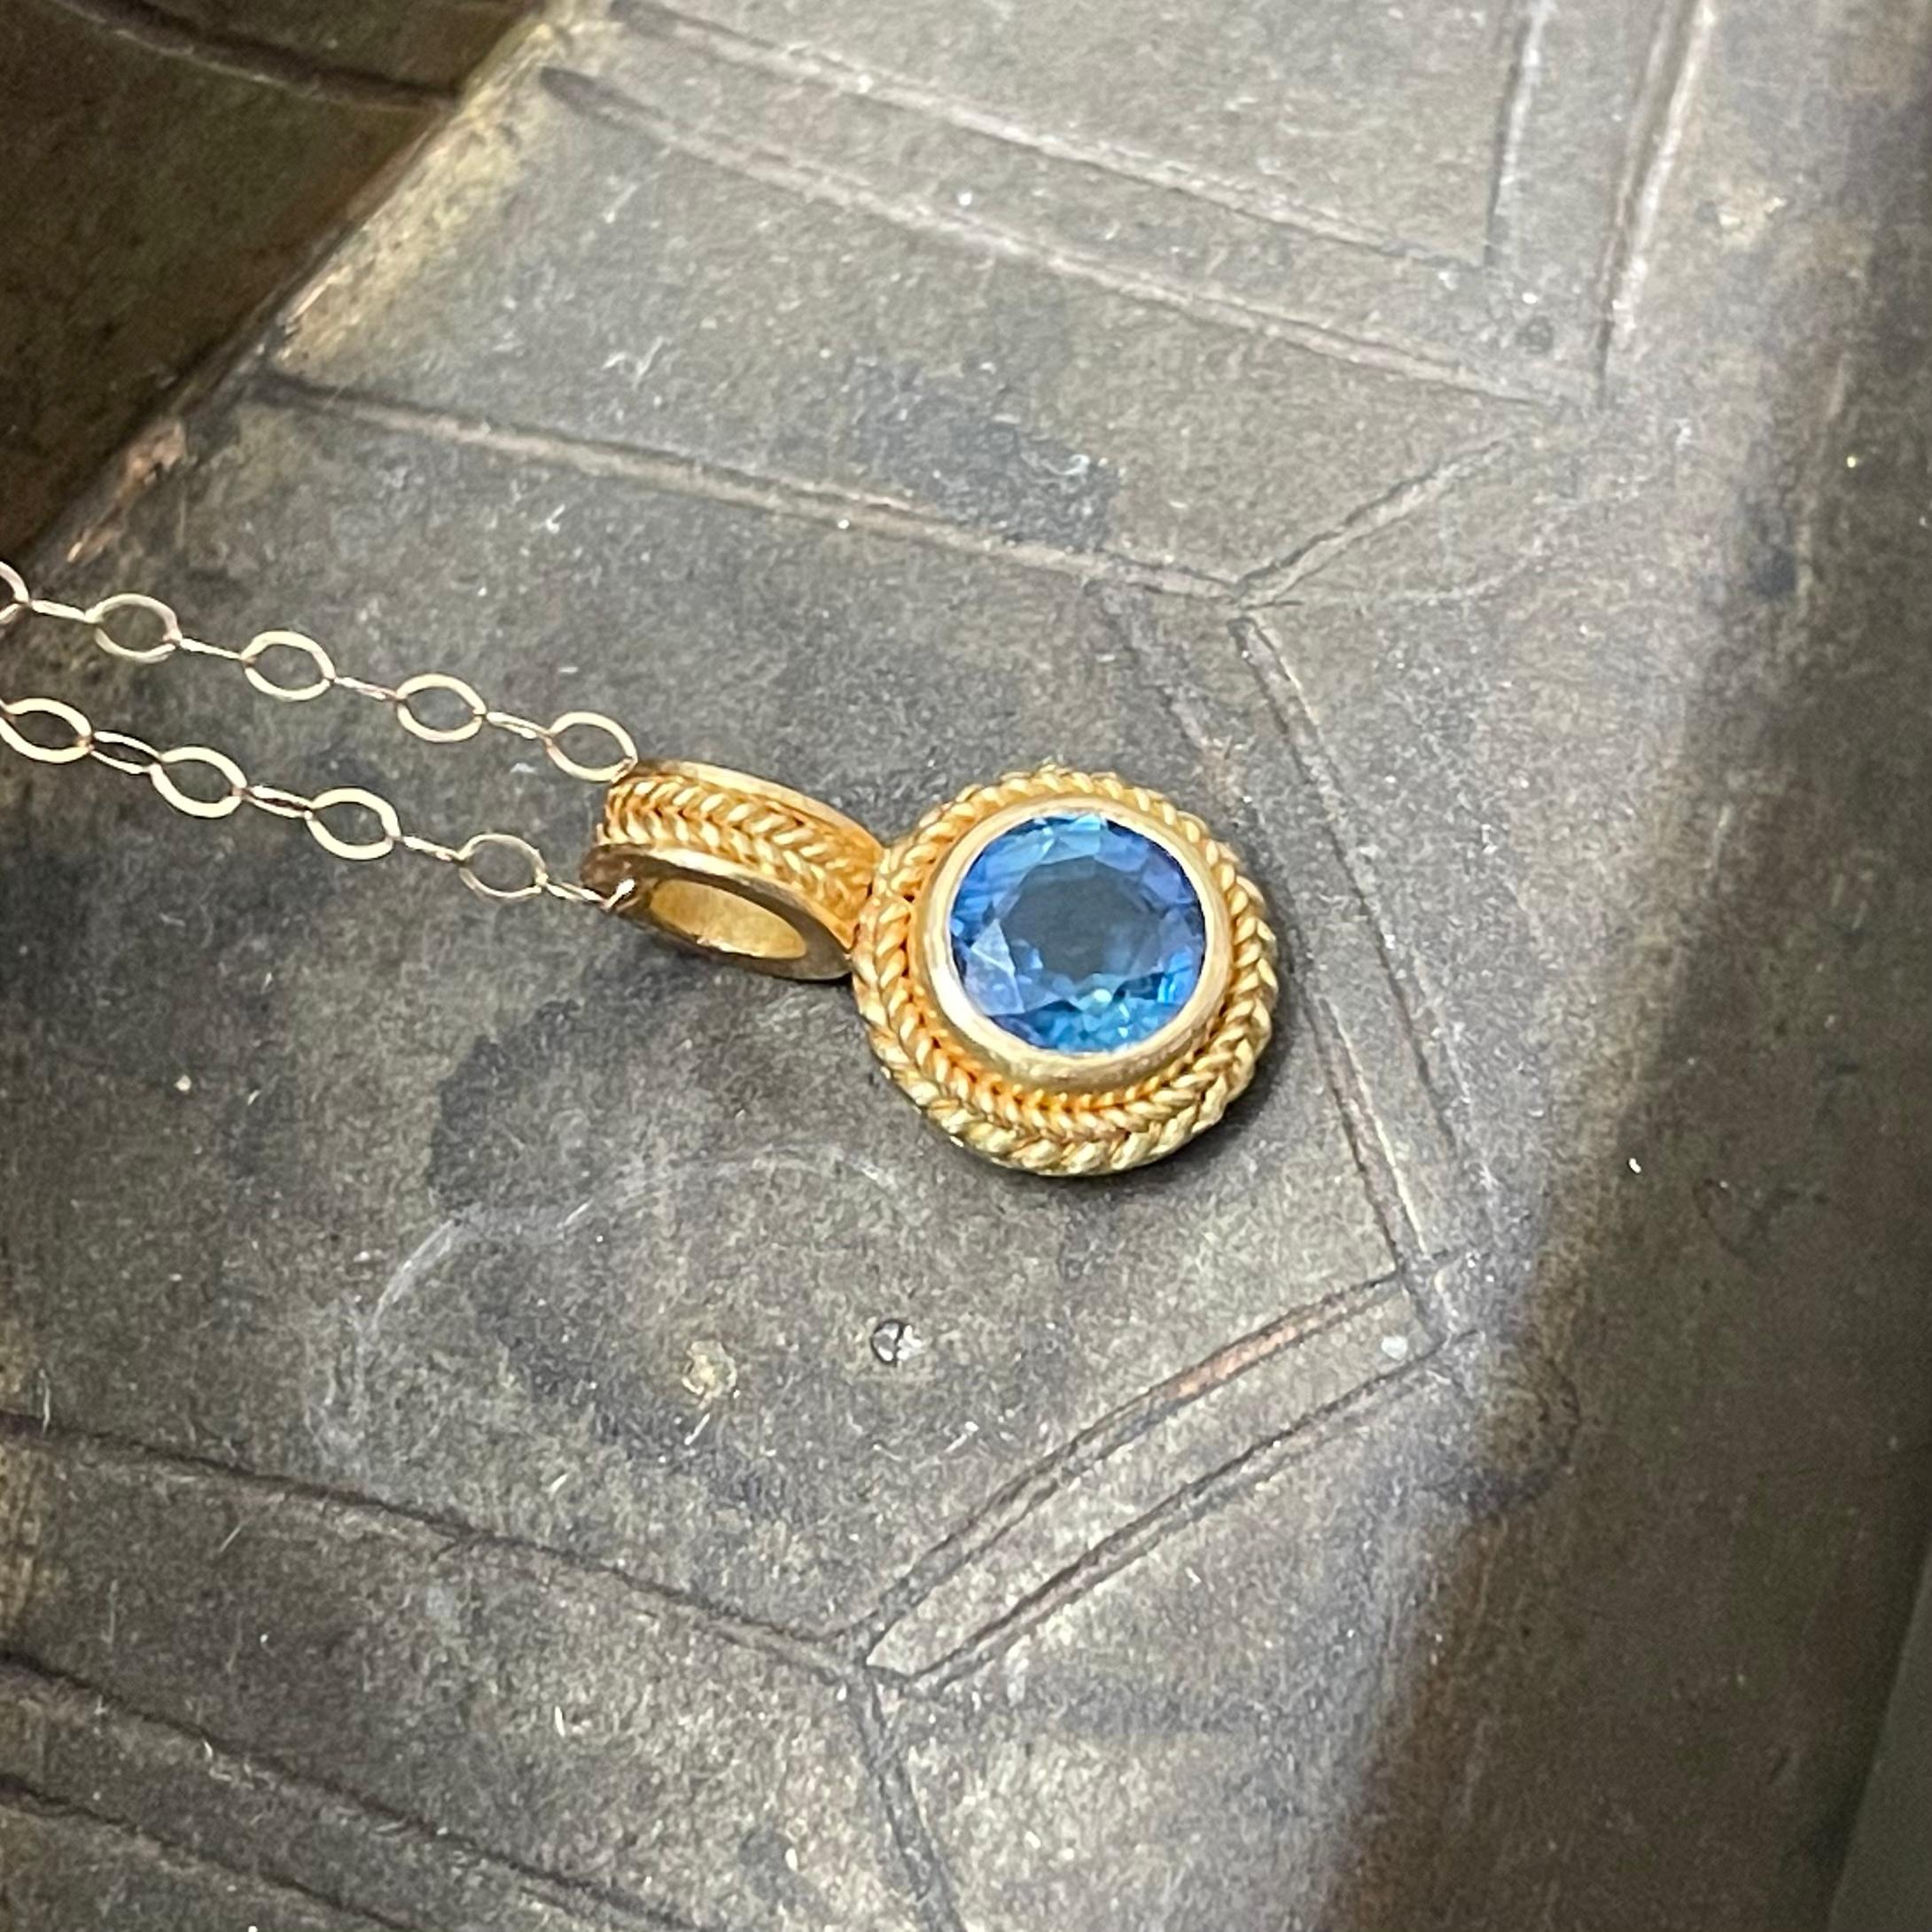 A light blue 5mm round faceted blue sapphire is set in a 22K double twist wire bezel setting with a round loop above decorated with similar motif.  This pendant comes with a delicate 18 inch 14K gold cable chain (could also be nice with a heavier